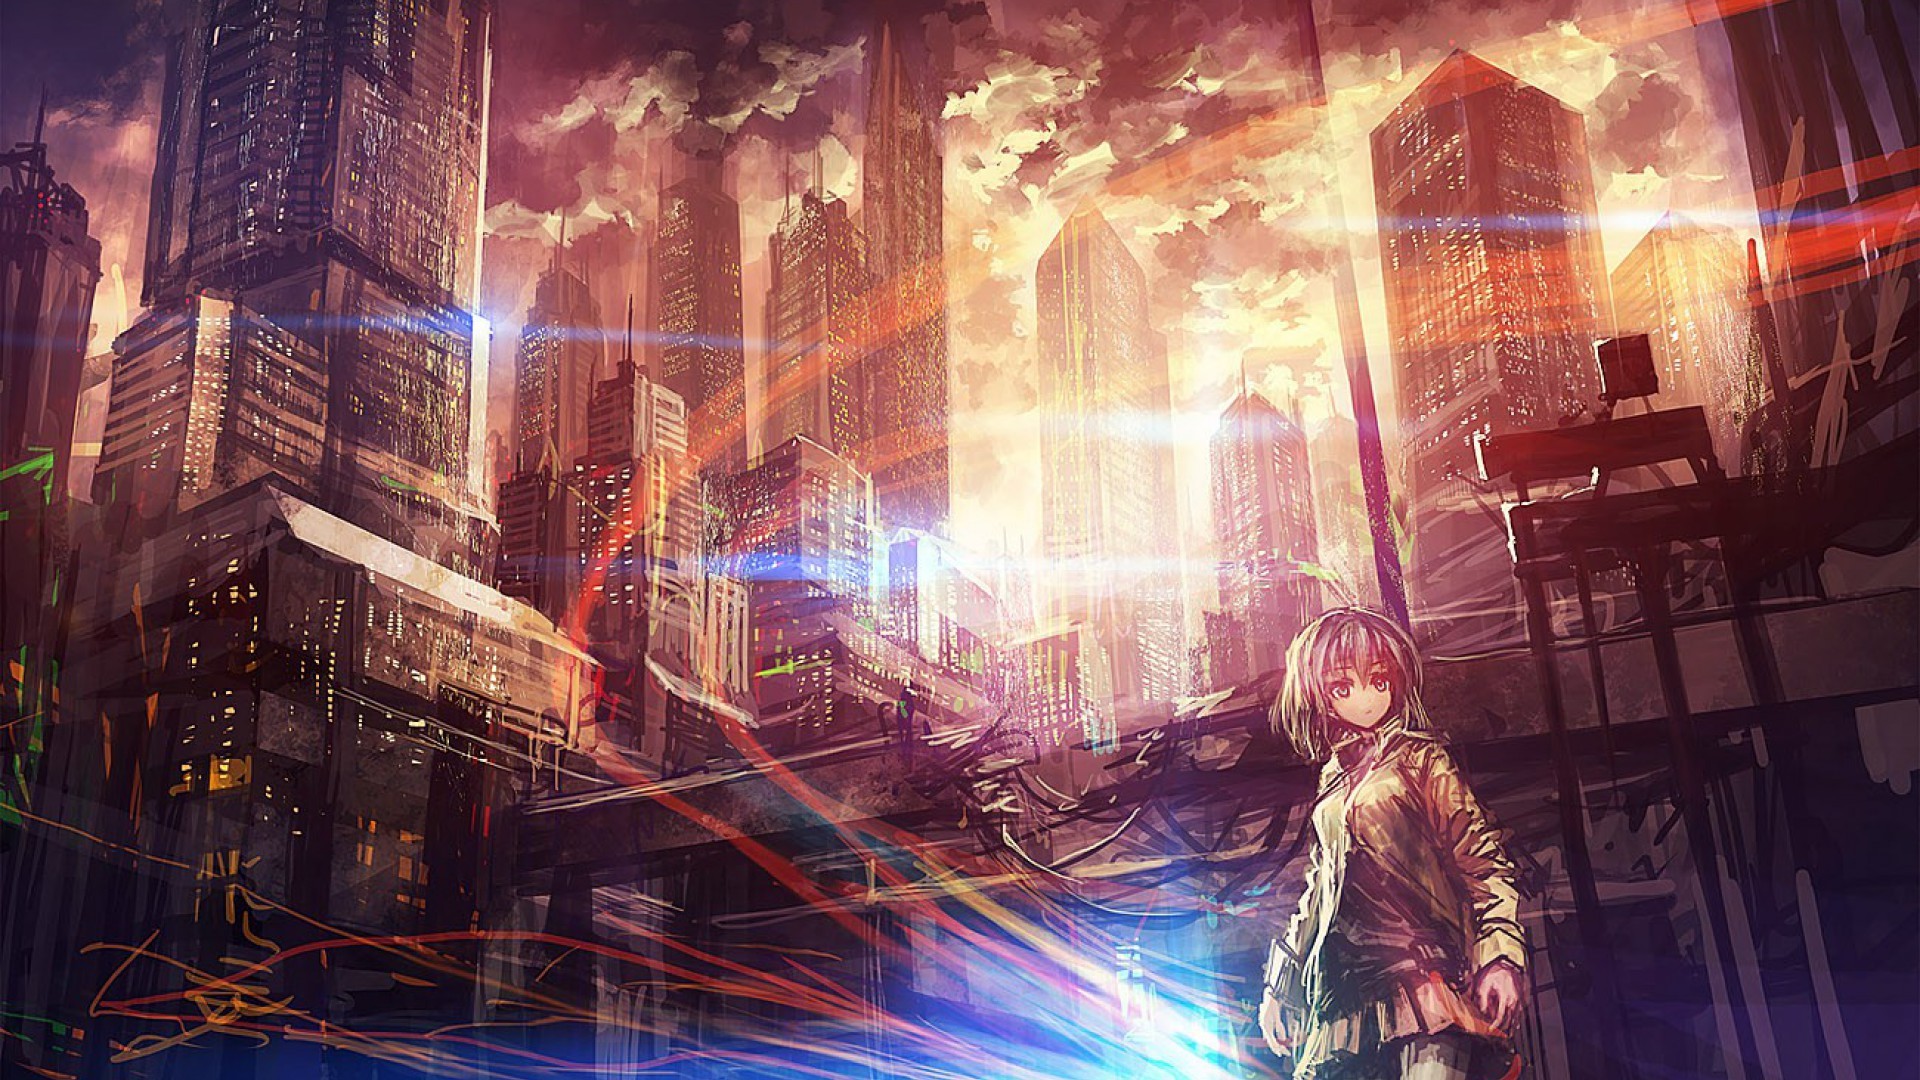 1920x1080 Anime City Scenery Wallpapers Background with High Definition Wallpaper   px 594.82 KB